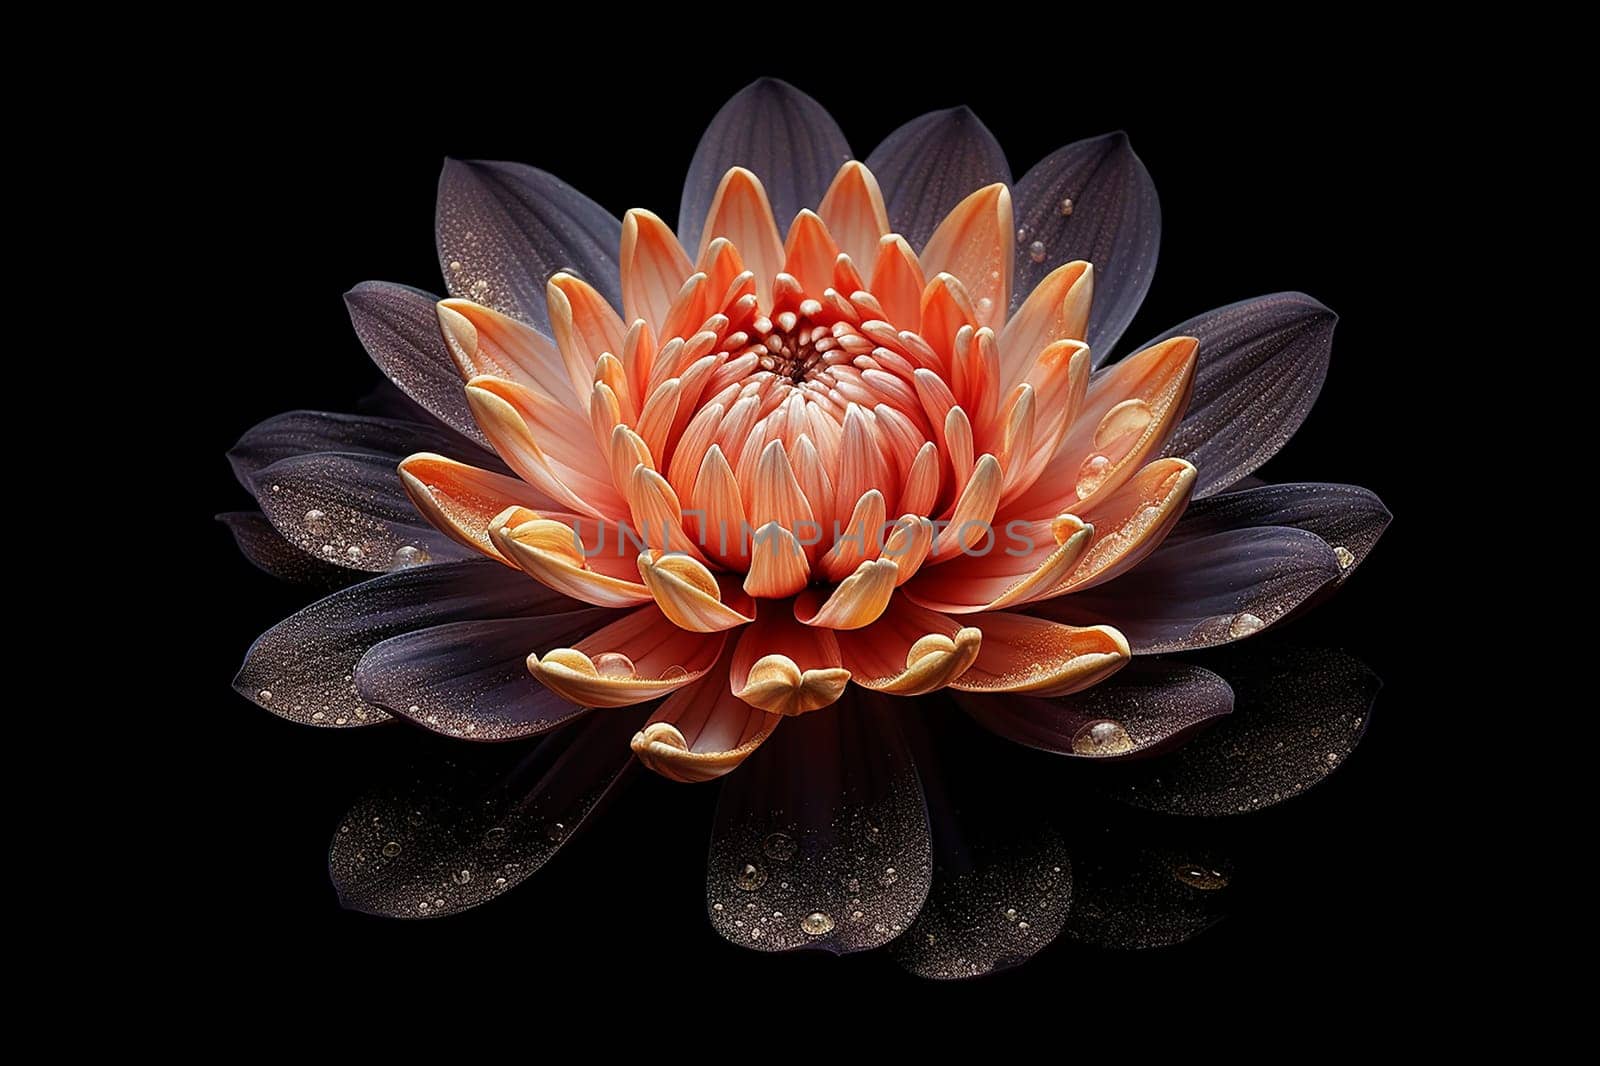 A vibrant orange flower with water droplets against a black background.